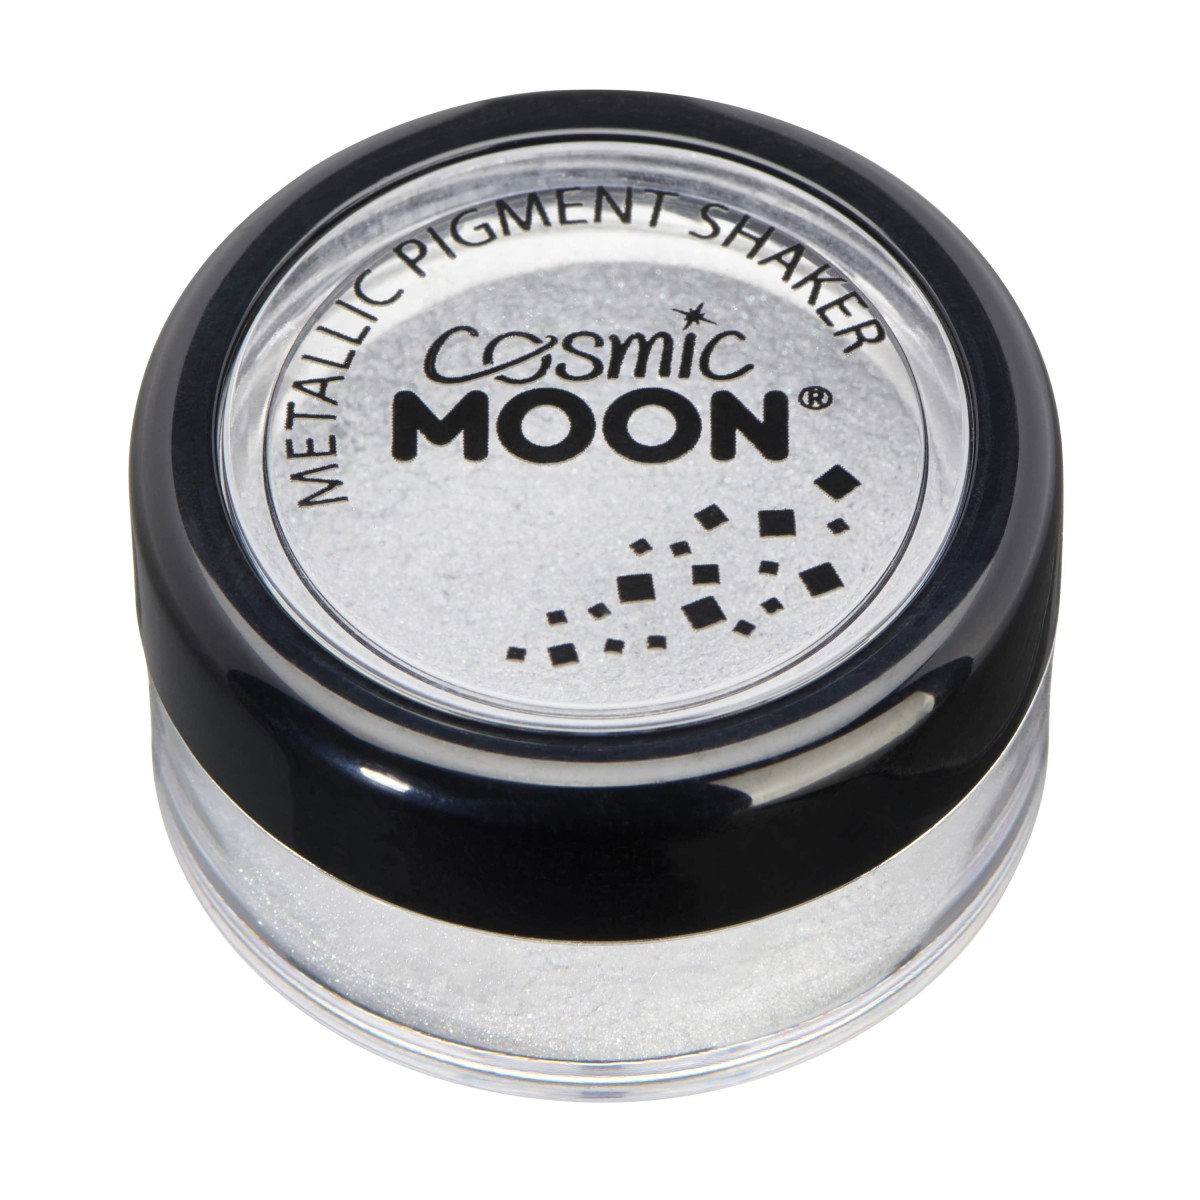 MOON CREATIONS S9 METALLIC FACE & BODY PIGMENT SHAKER SILVER 3g